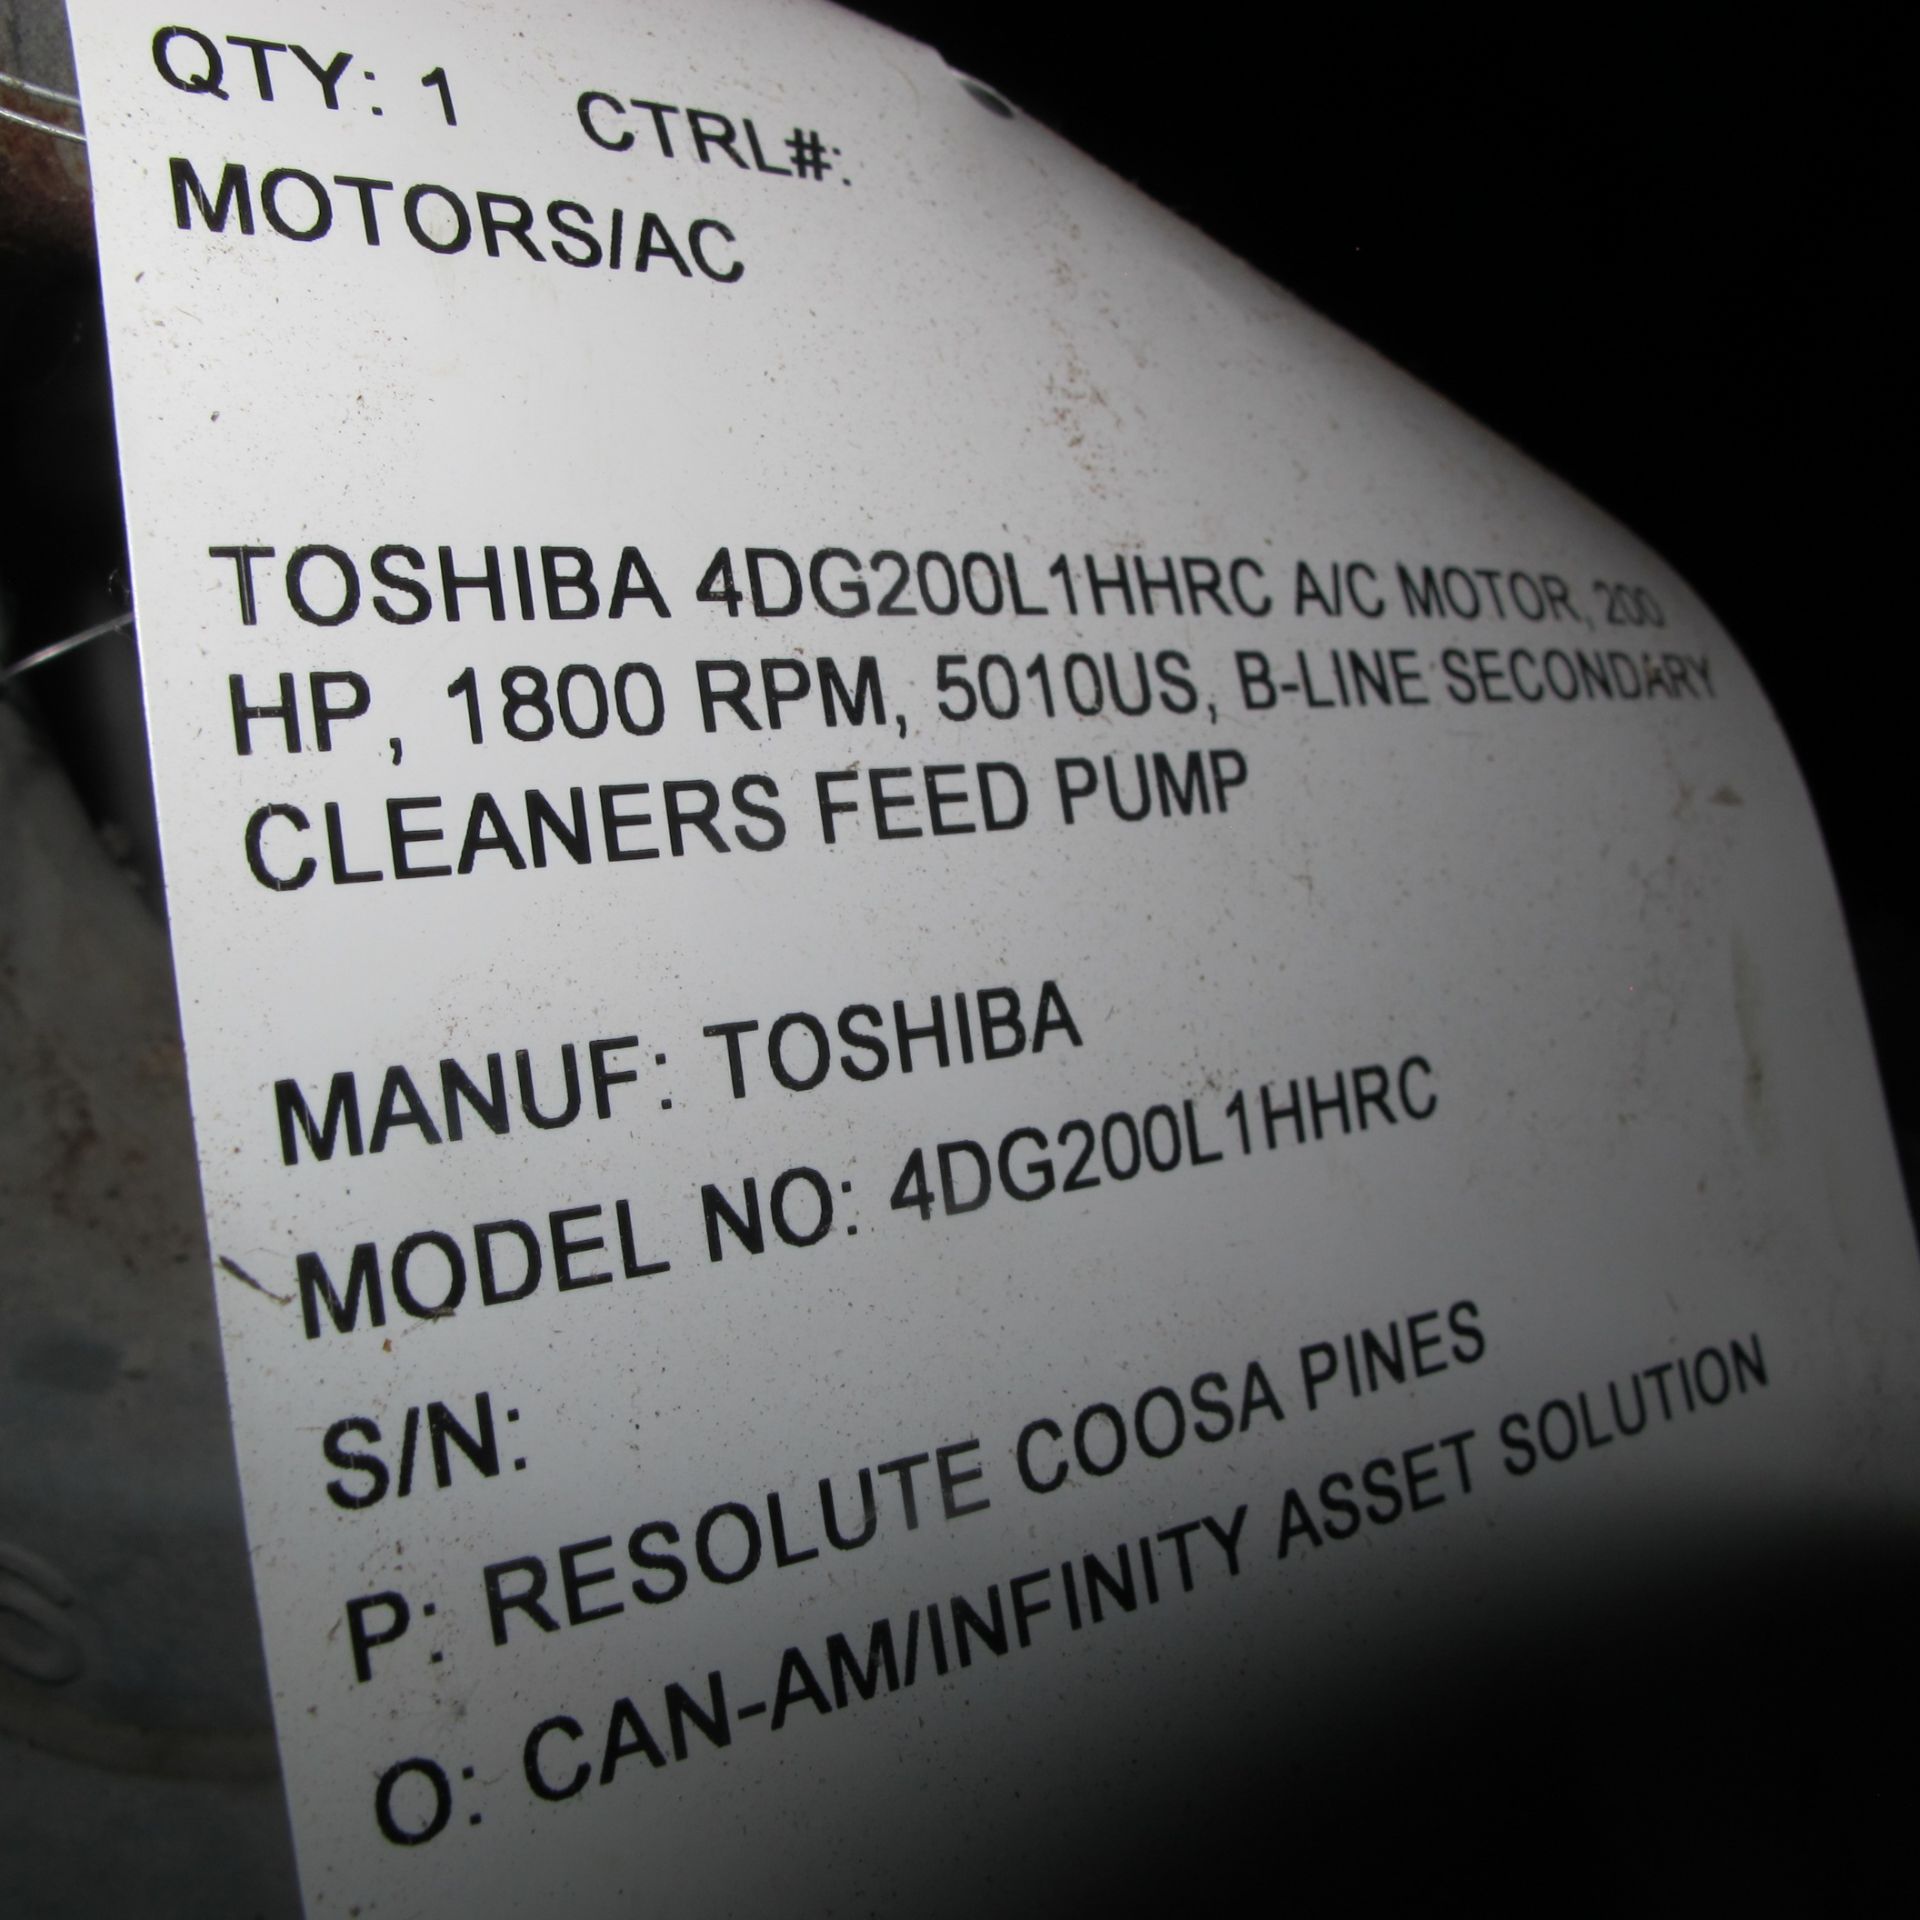 TOSHIBA 4DG200L1HHRC A/C MOTOR, 200 HP, 1800 RPM, 5010US, B-LINE SECONDARY CLEANERS FEED PUMP ( - Image 3 of 3